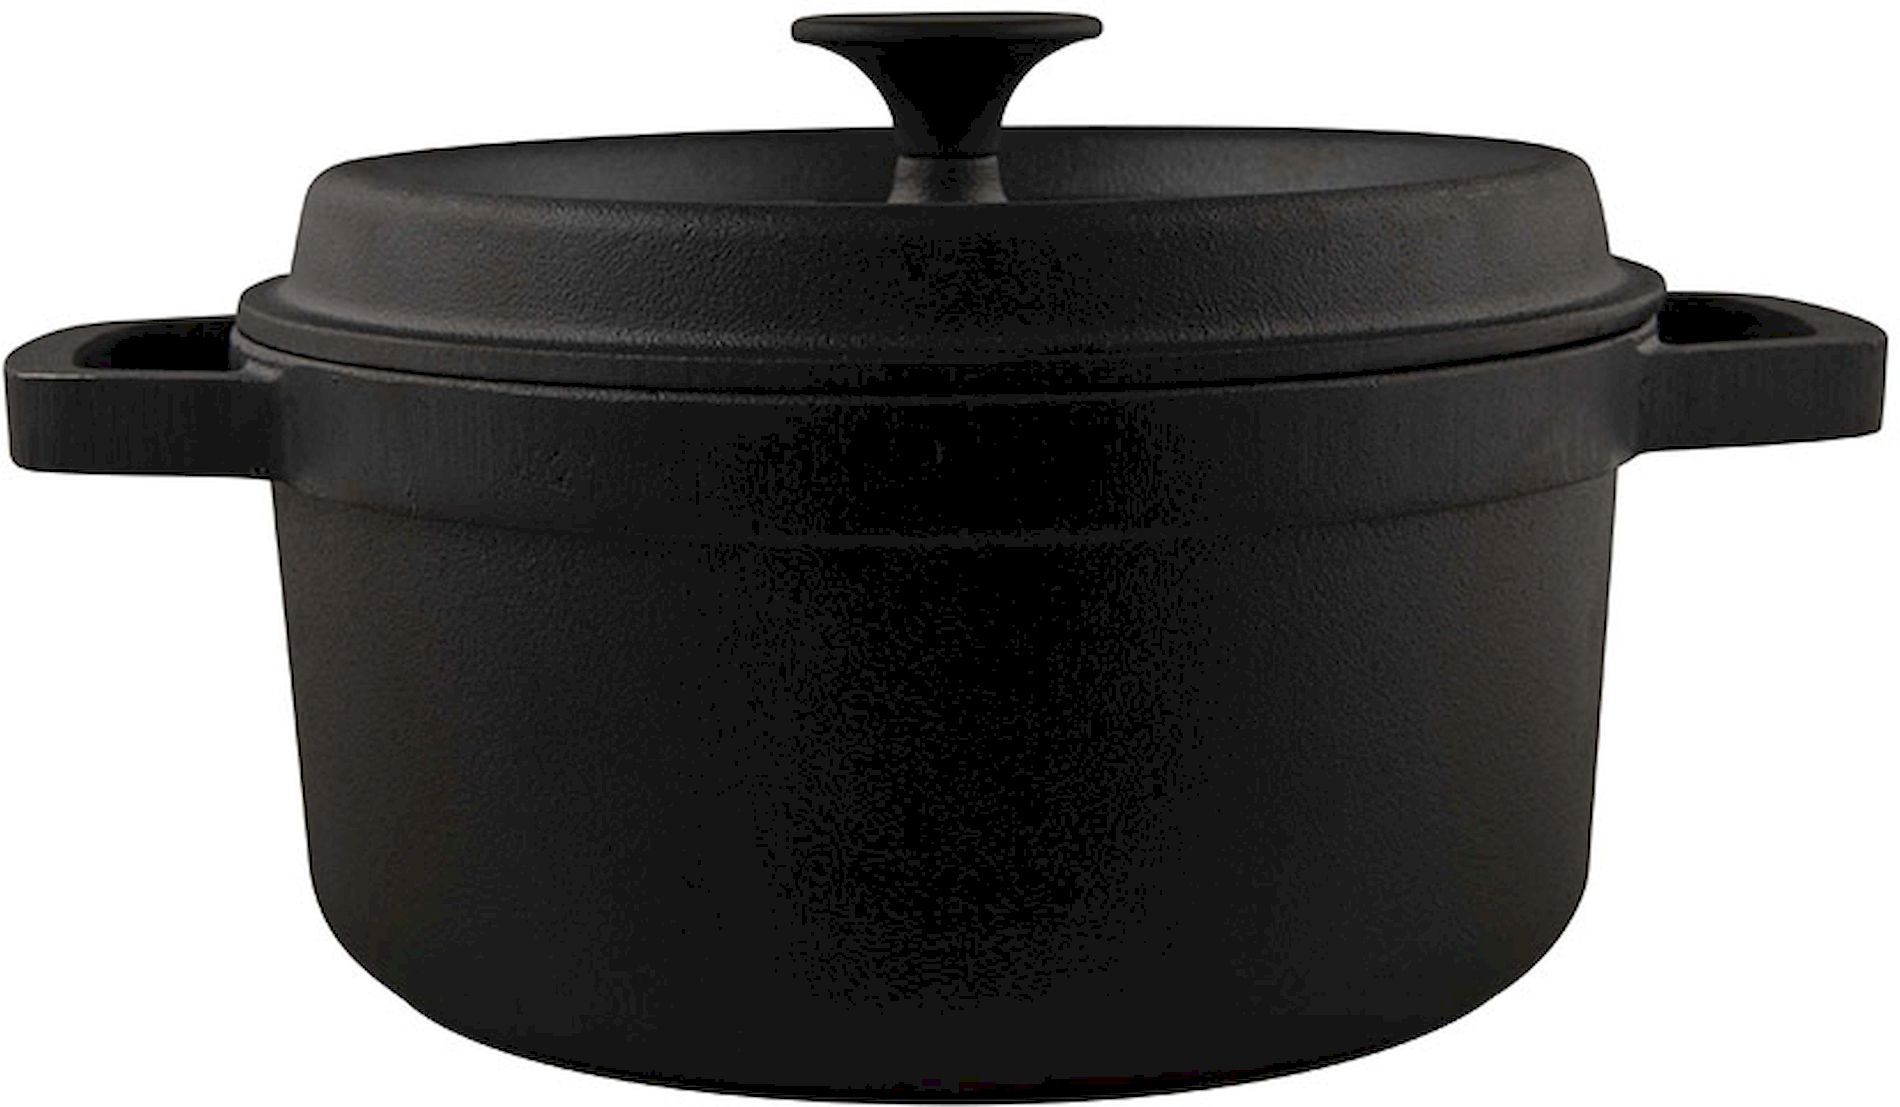 The Windmill Dutch Oven large - 3,5 liter